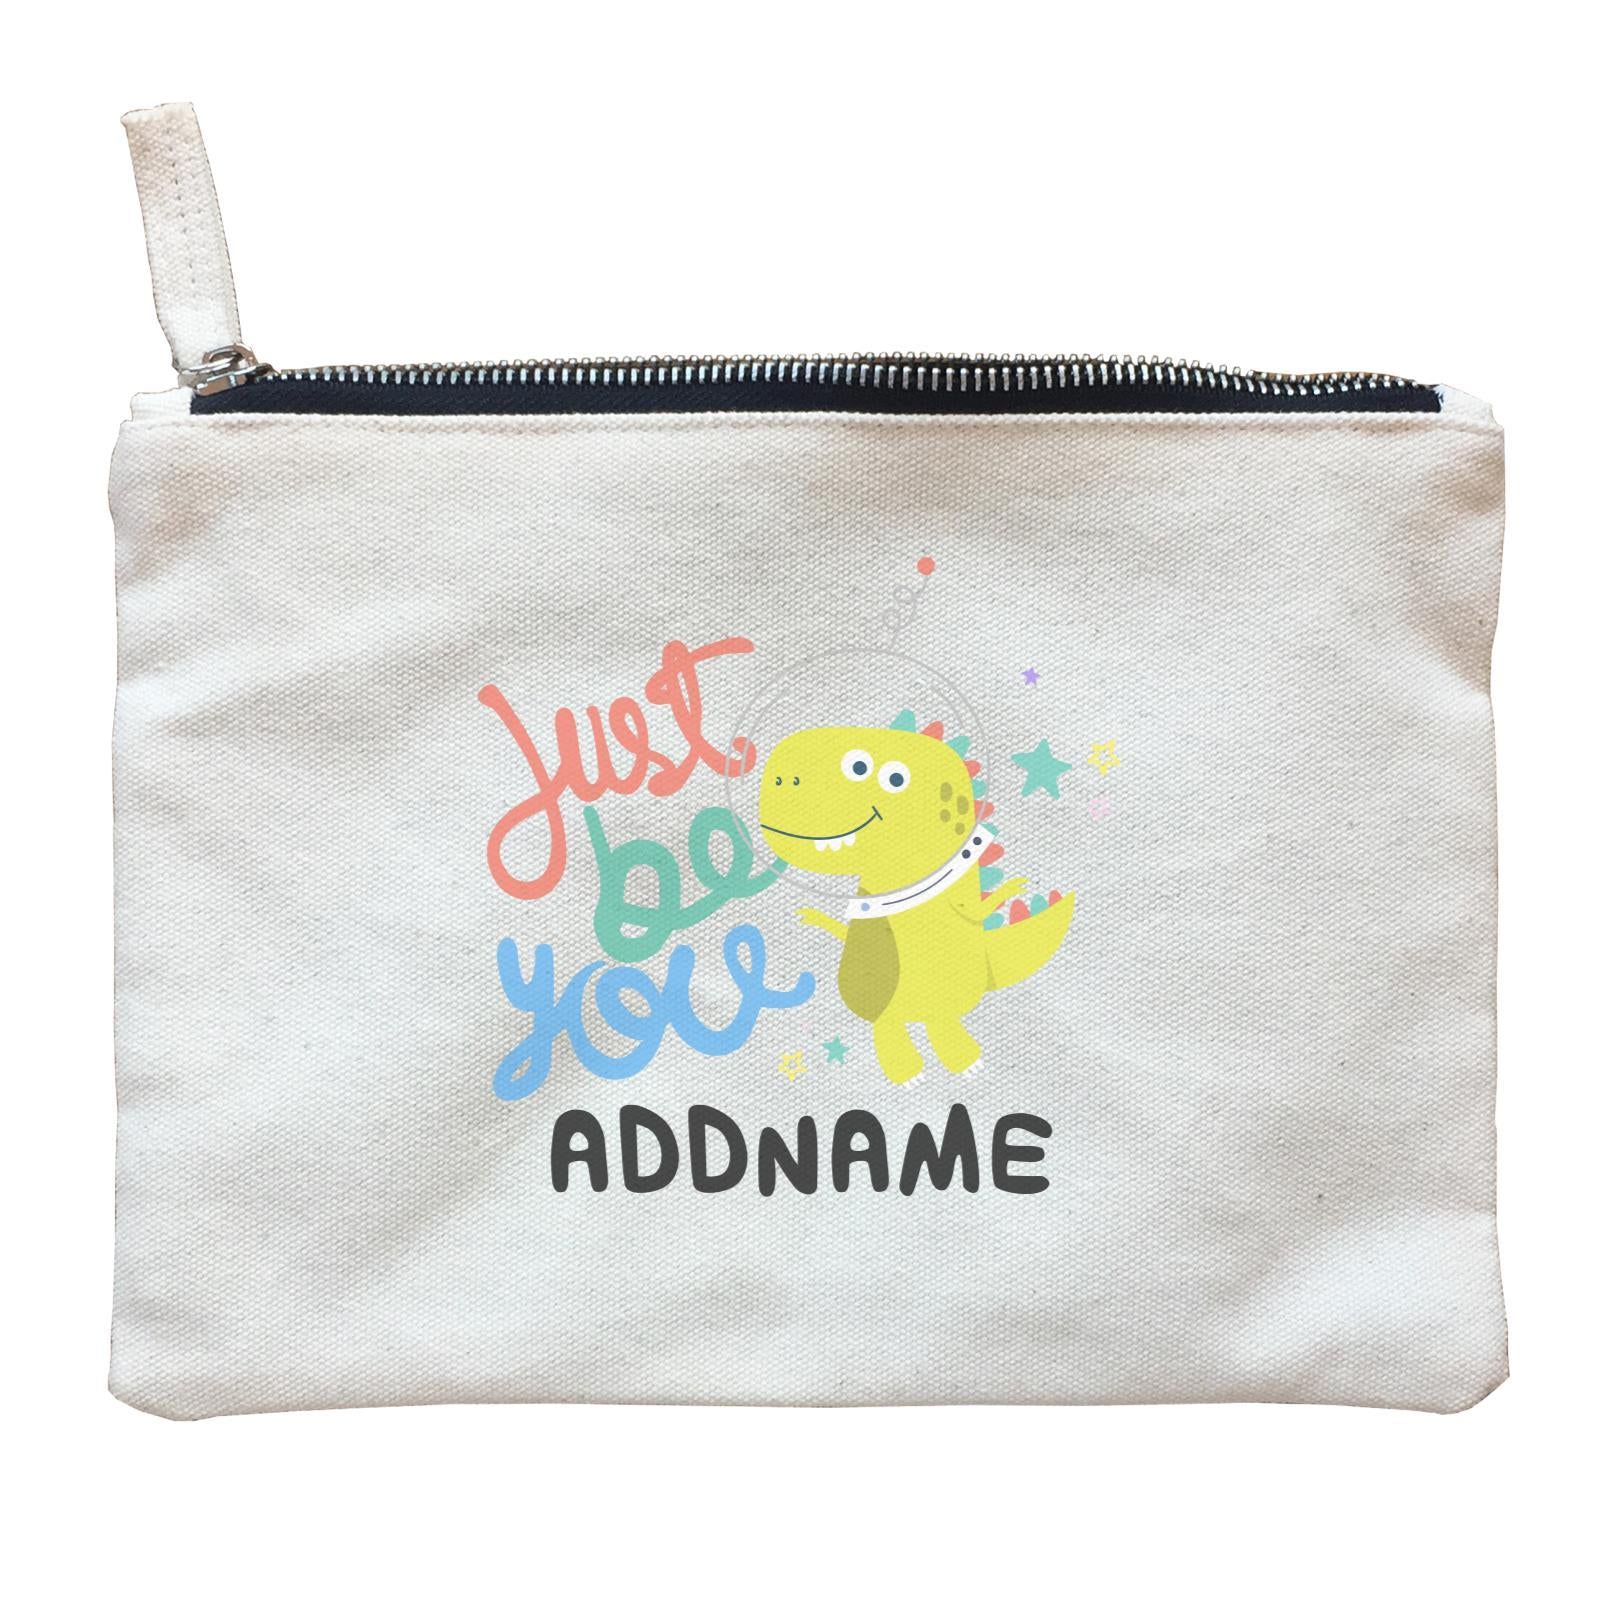 Children's Day Gift Series Just Be You Space Dinosaur Addname  Zipper Pouch